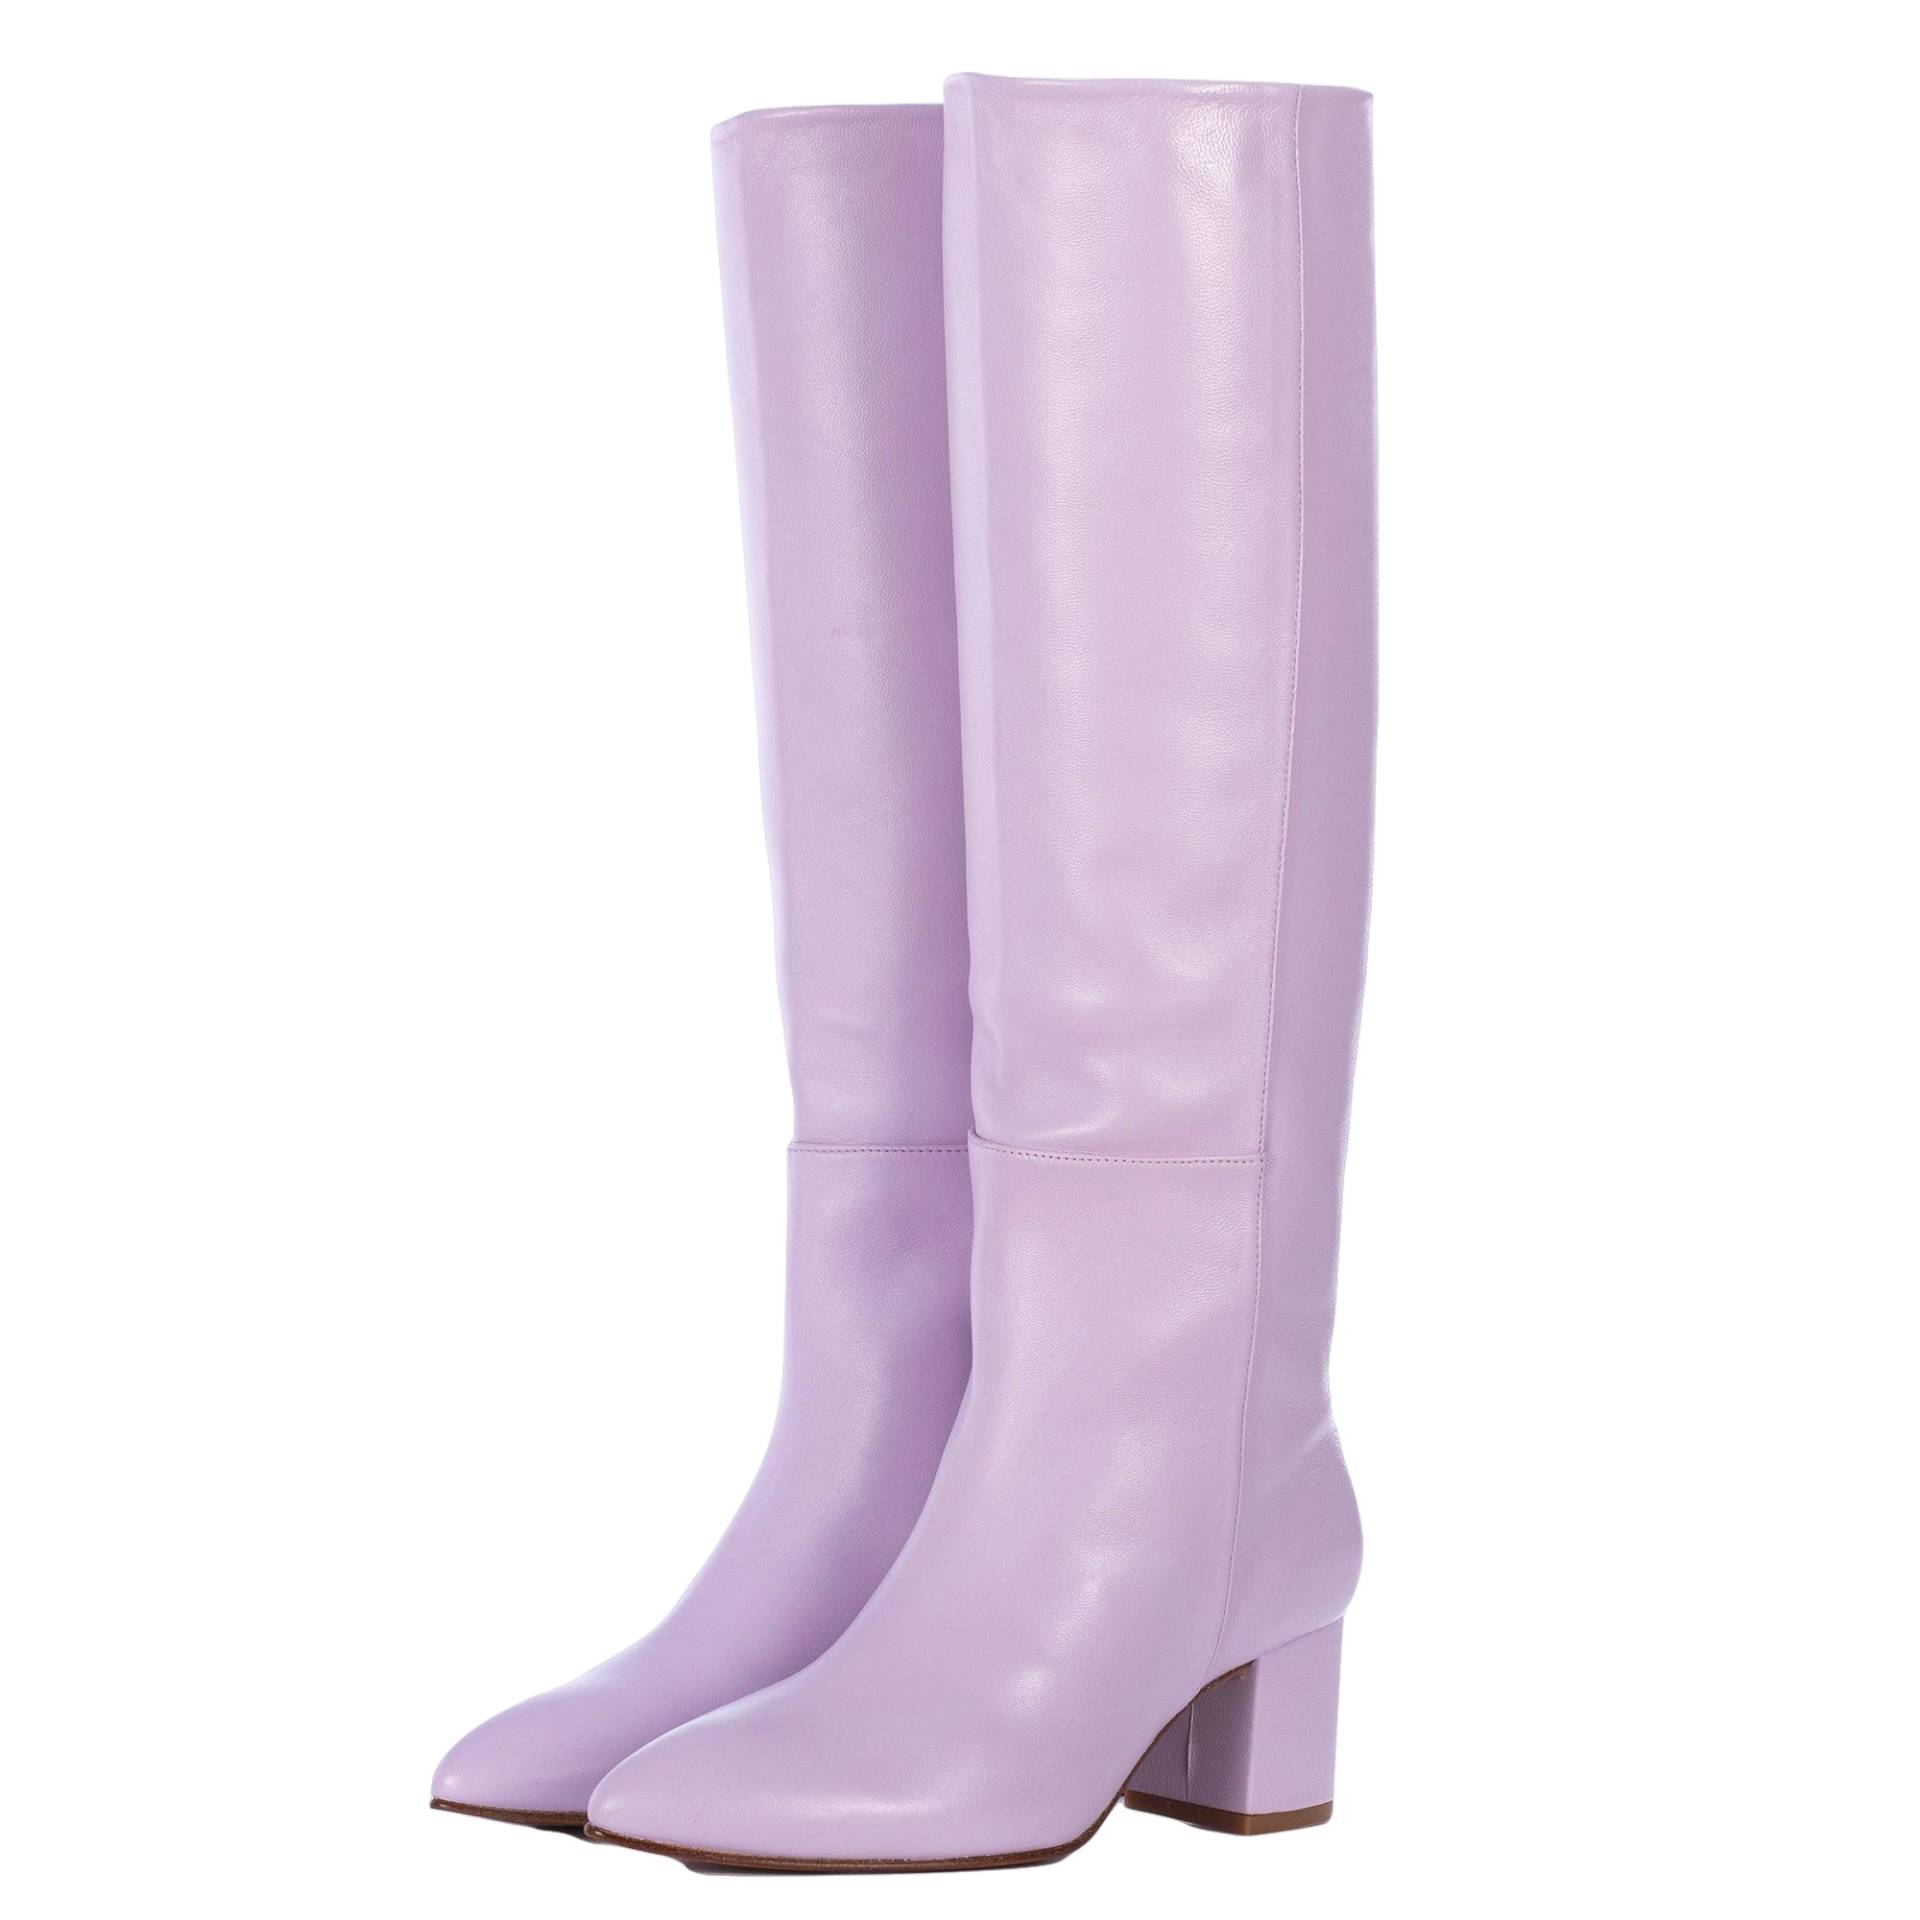 MAUVE LEATHER TALL BOOTS von Toral